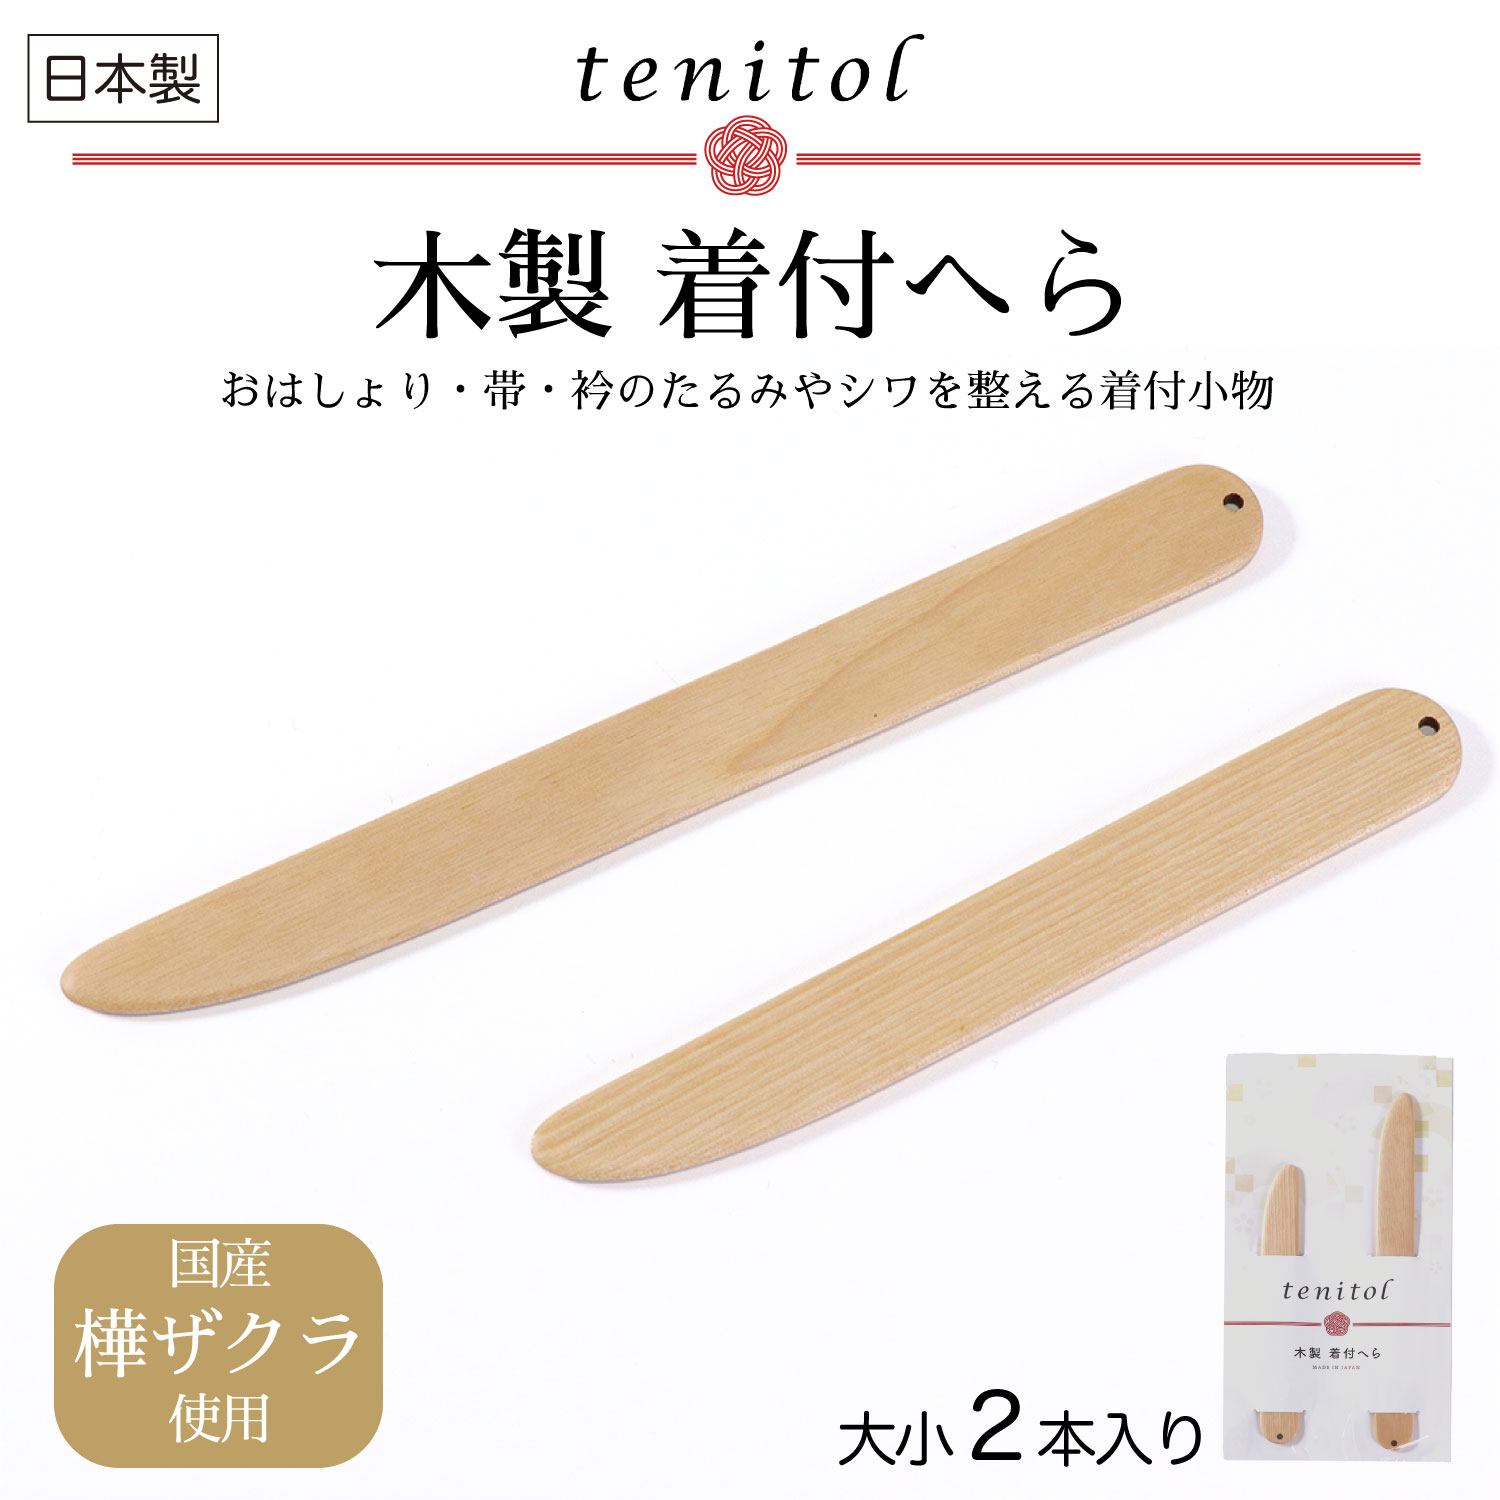 tenitol 着付けへら 大/小 2本セット